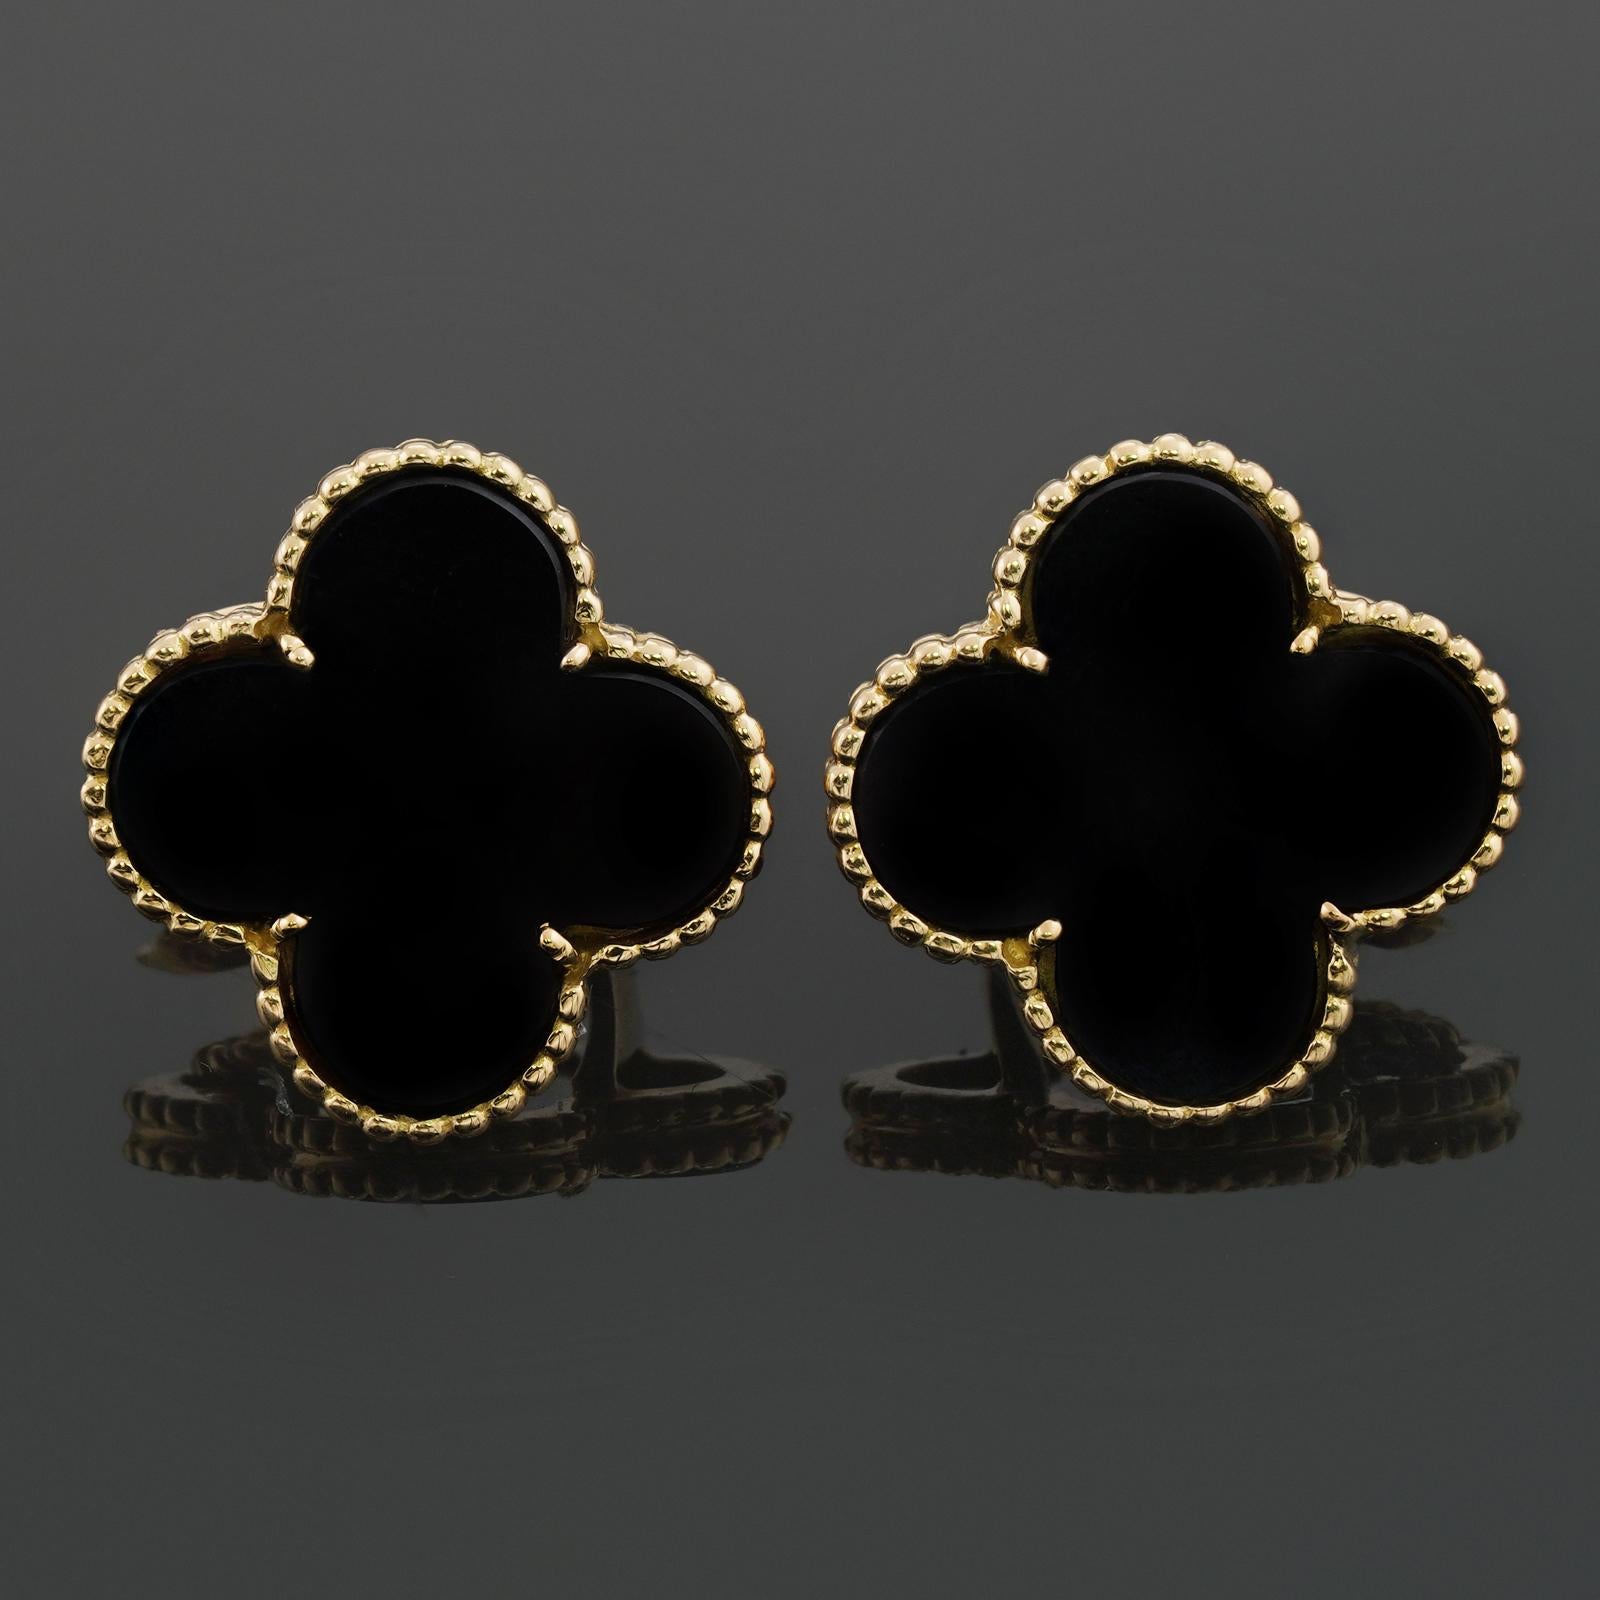 These iconic rare Van Cleef & Arpels clip-on earrings from the Magic Alhambra collection are crafted in 18k yellow gold and feature a pair of lucky clover motifs inlaid with black onyx round bead settings. Made in France circa 1990s. Posts can be